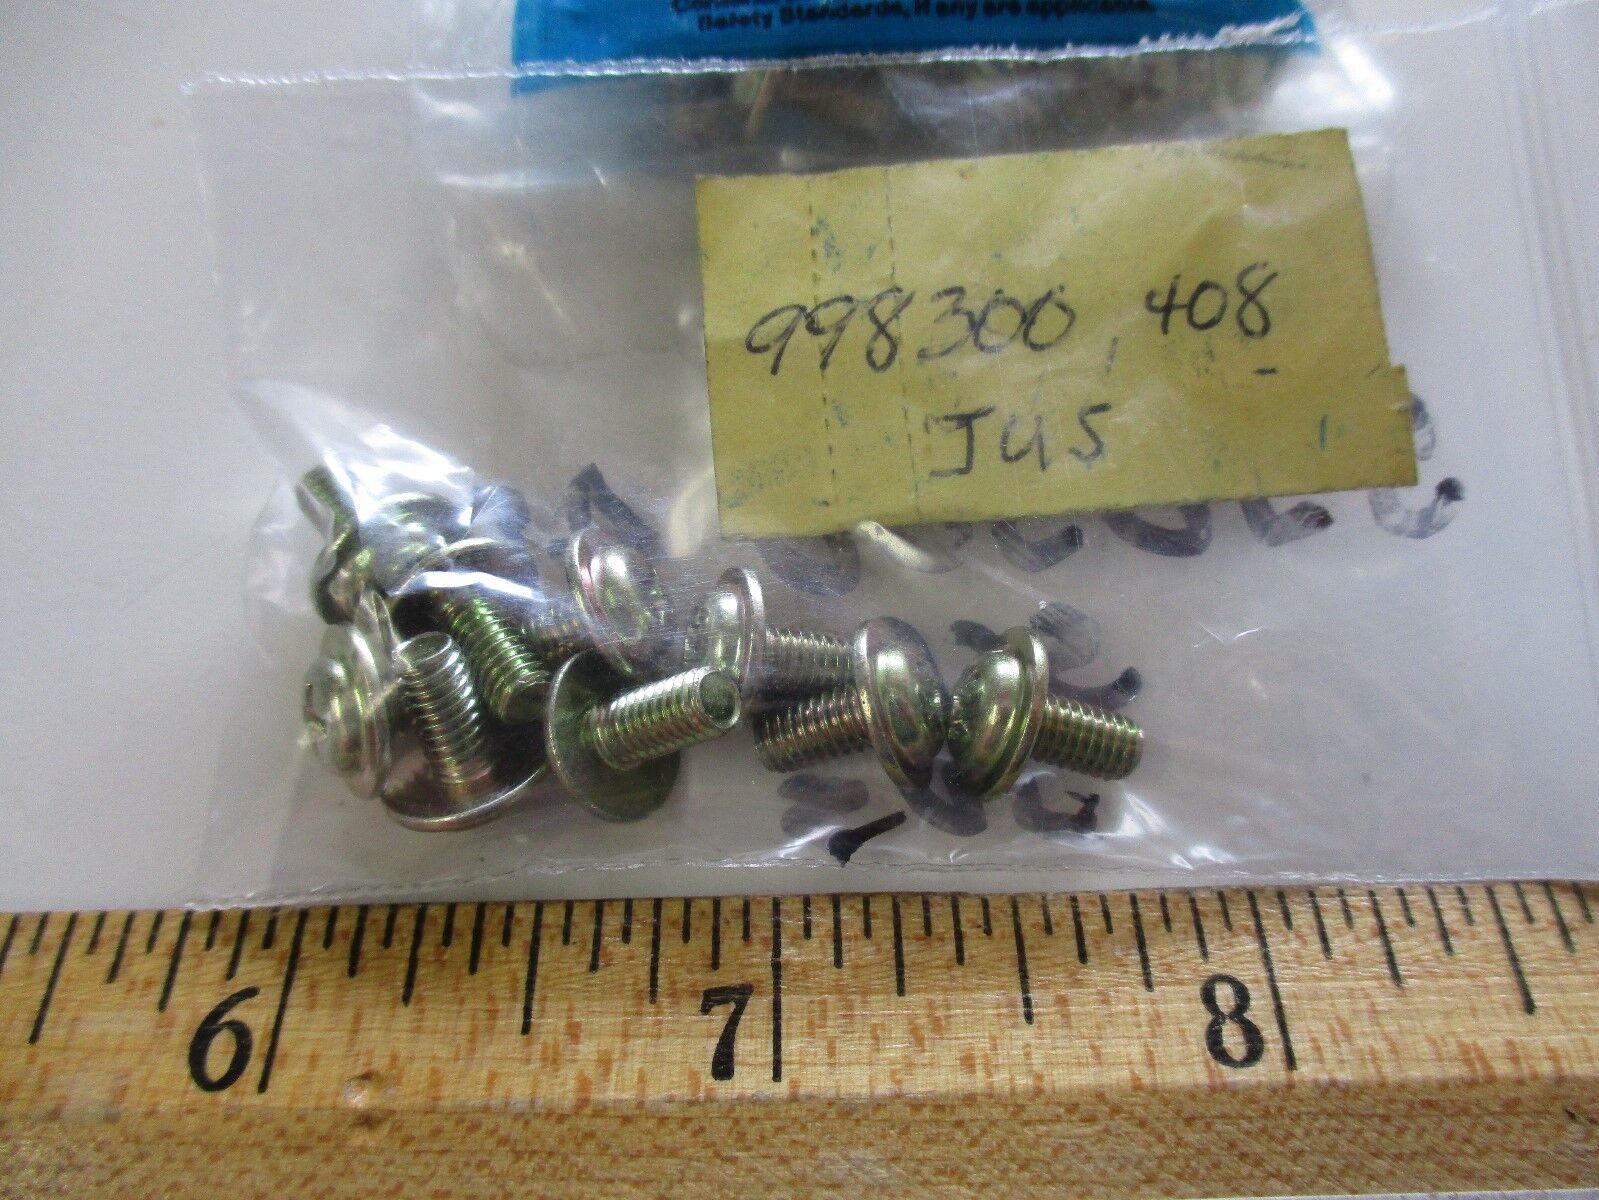 9 PCS FORD SCREW (ROUND WASHER HEAD) M4X0.7 PART 998300 408, JUS, 